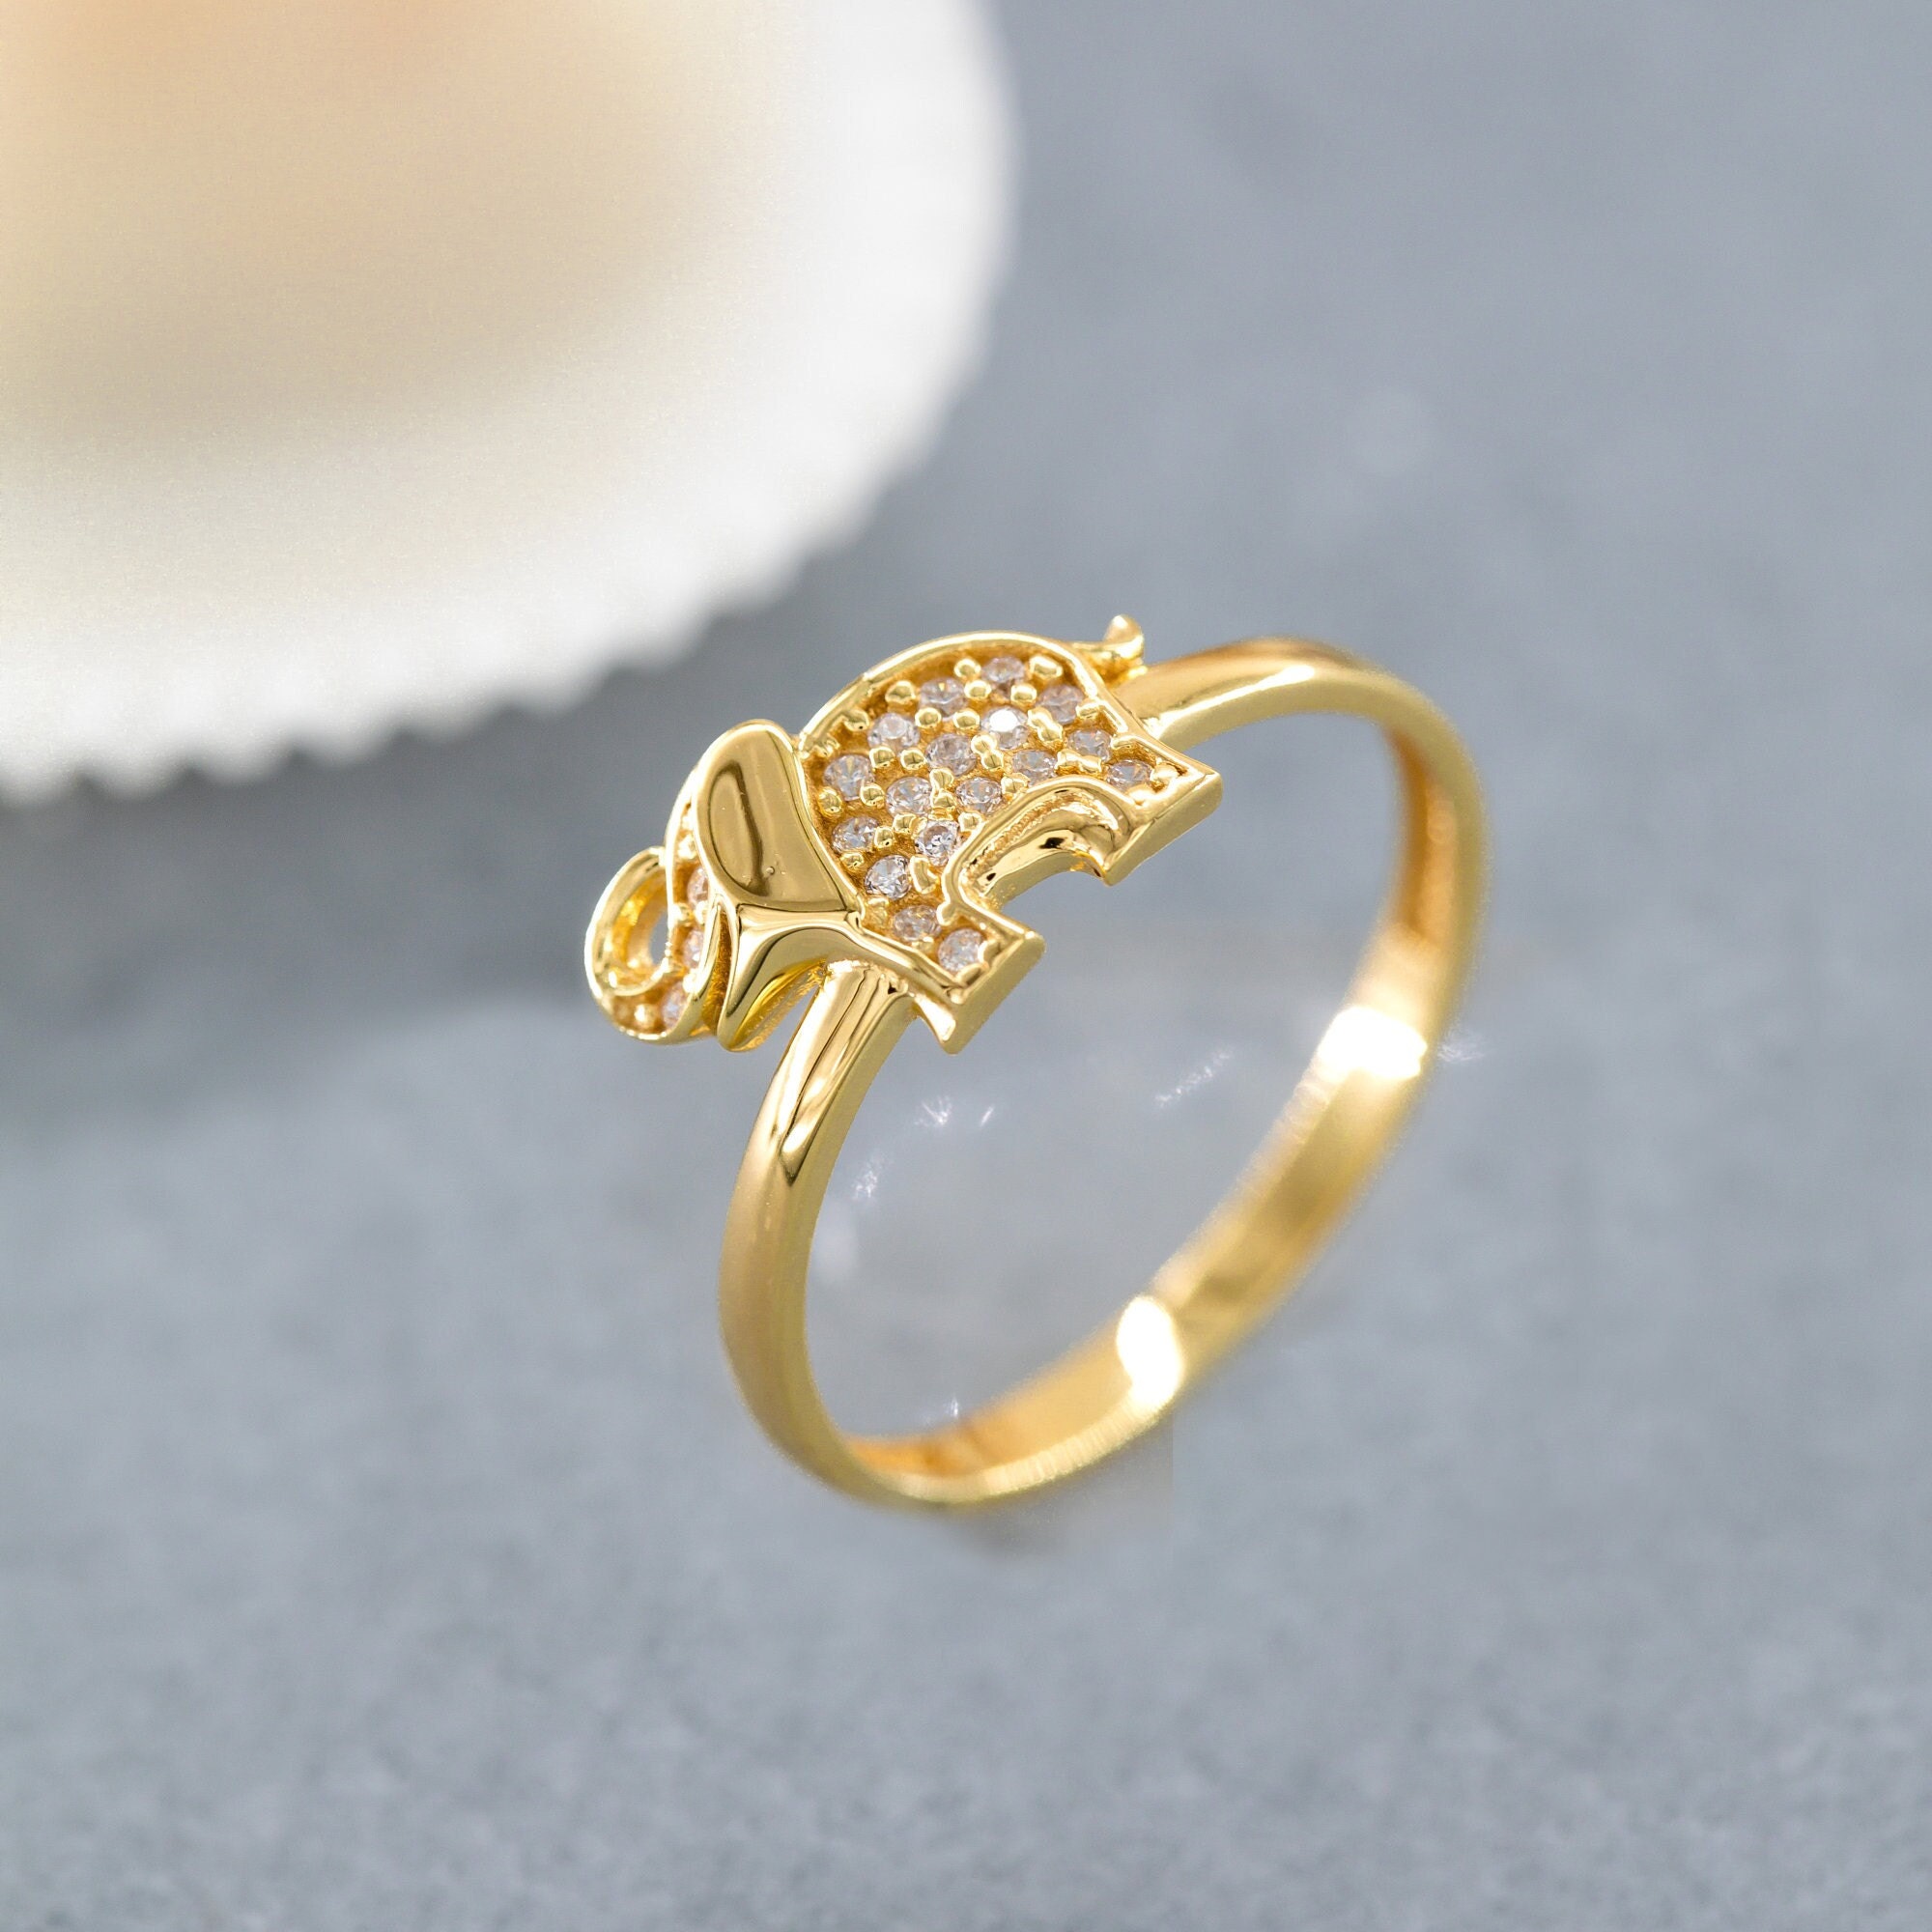 Elephant hair jewelry was popular amongst Victorians during the Raj-era.  Souvenirs like this ring wo… | Elephant hair jewelry, Gold ring designs, Elephant  ring gold